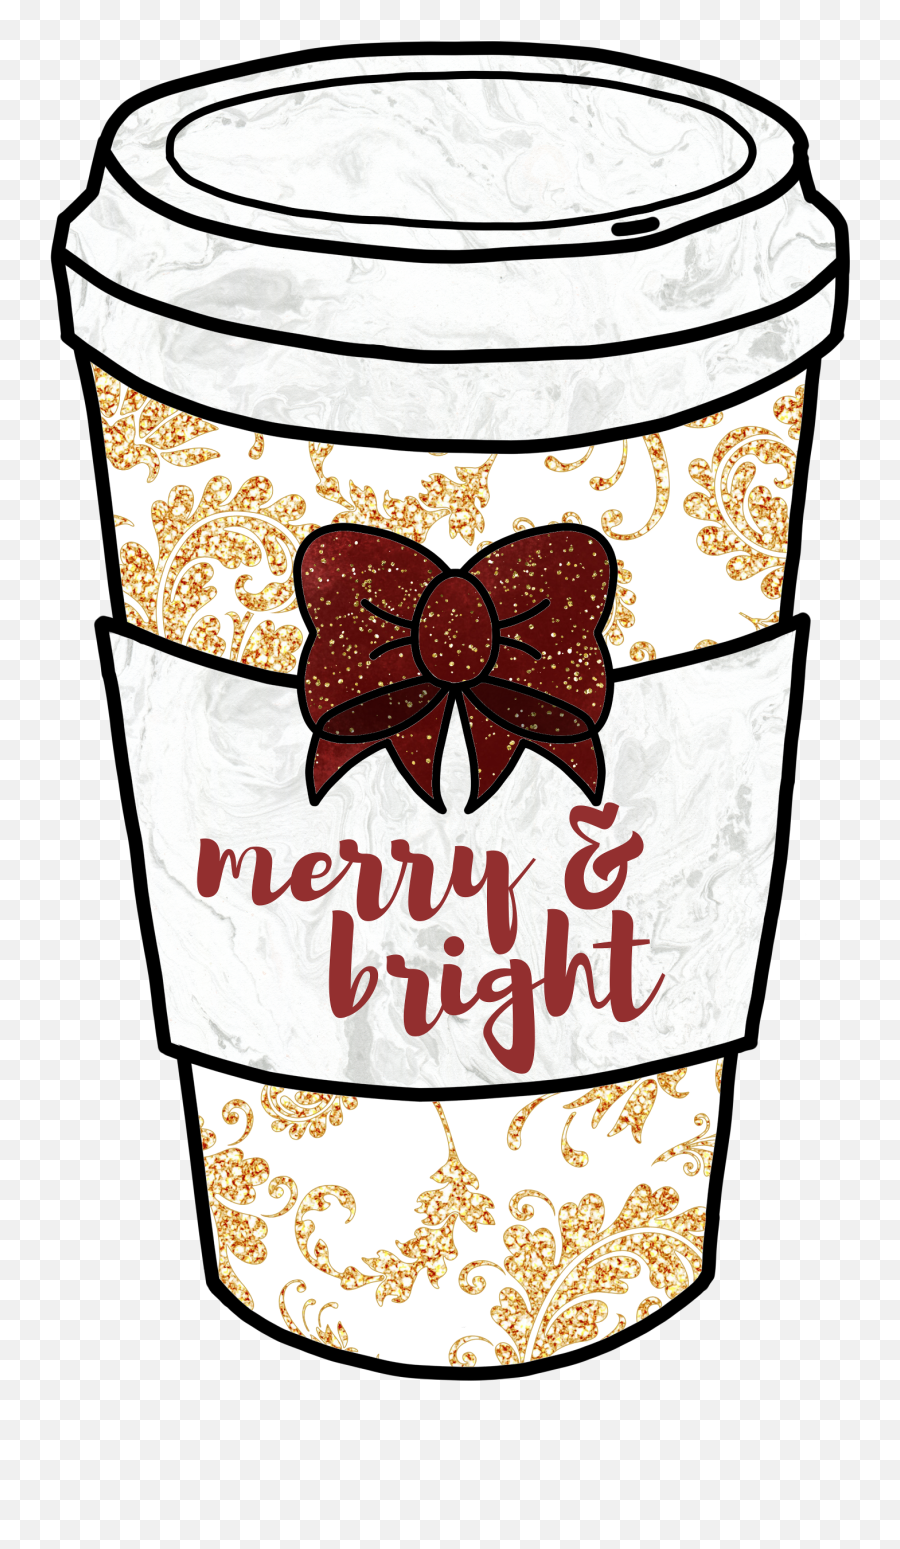 Merry And Bright Coffee Cup Clip Art And Diy Wall Art Emoji,Coffe Cup Clipart